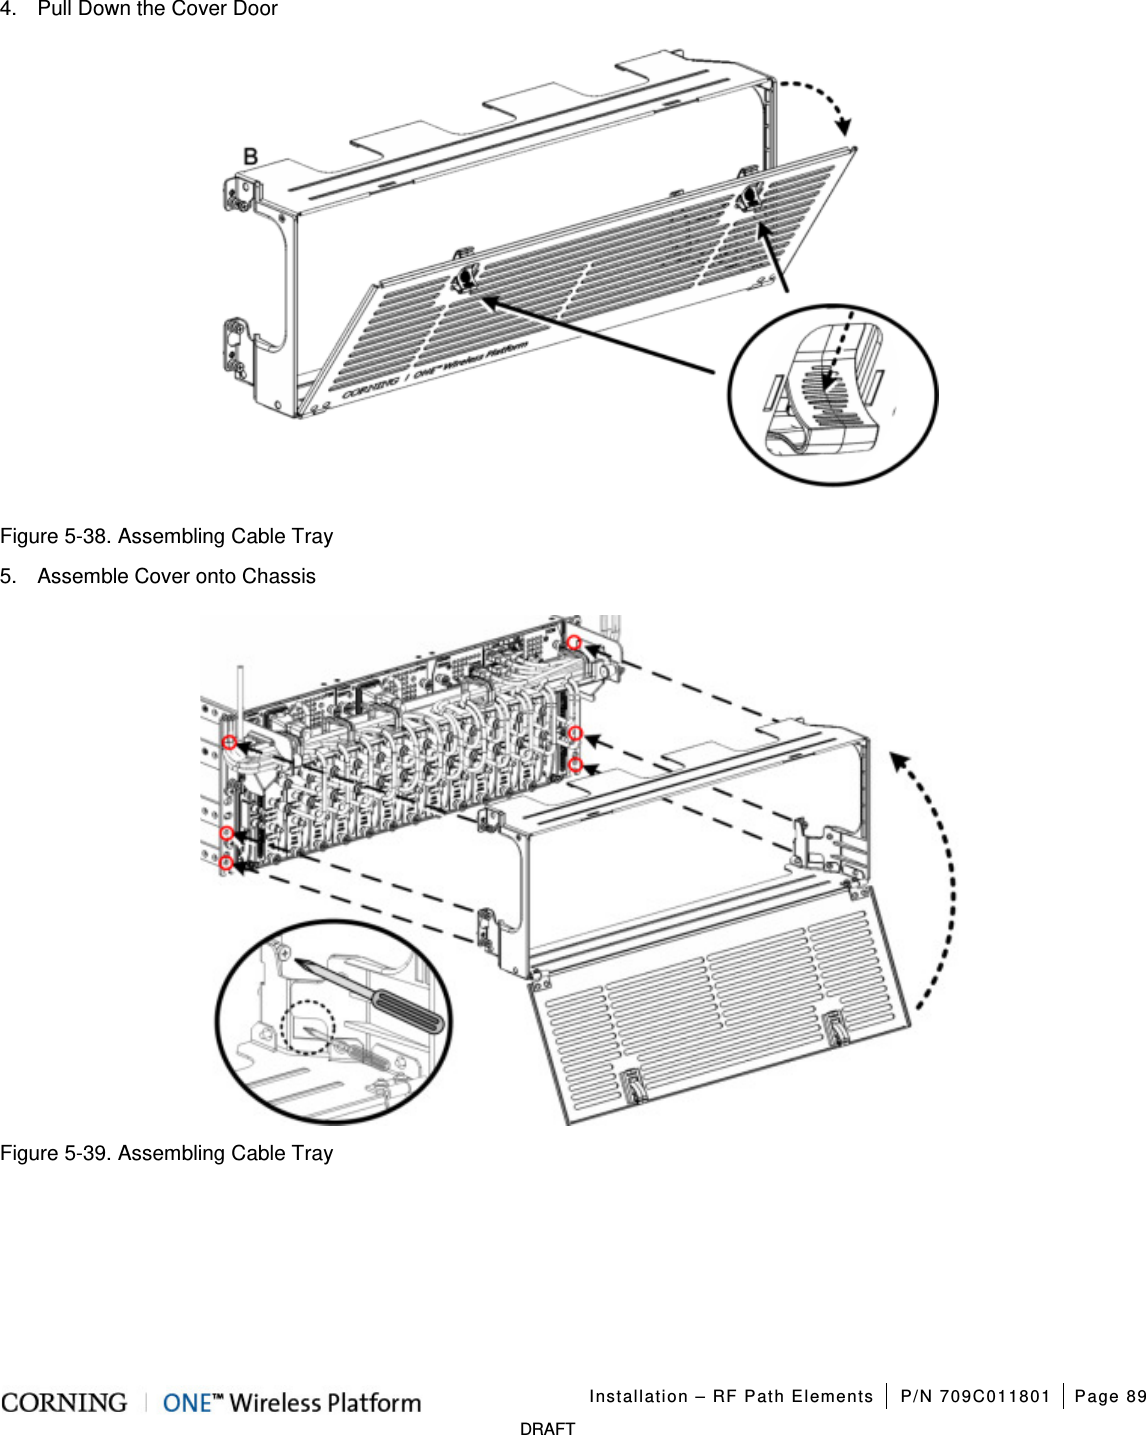   Installation – RF Path Elements P/N 709C011801 Page 89   DRAFT 4.  Pull Down the Cover Door  Figure  5-38. Assembling Cable Tray 5.  Assemble Cover onto Chassis  Figure  5-39. Assembling Cable Tray    